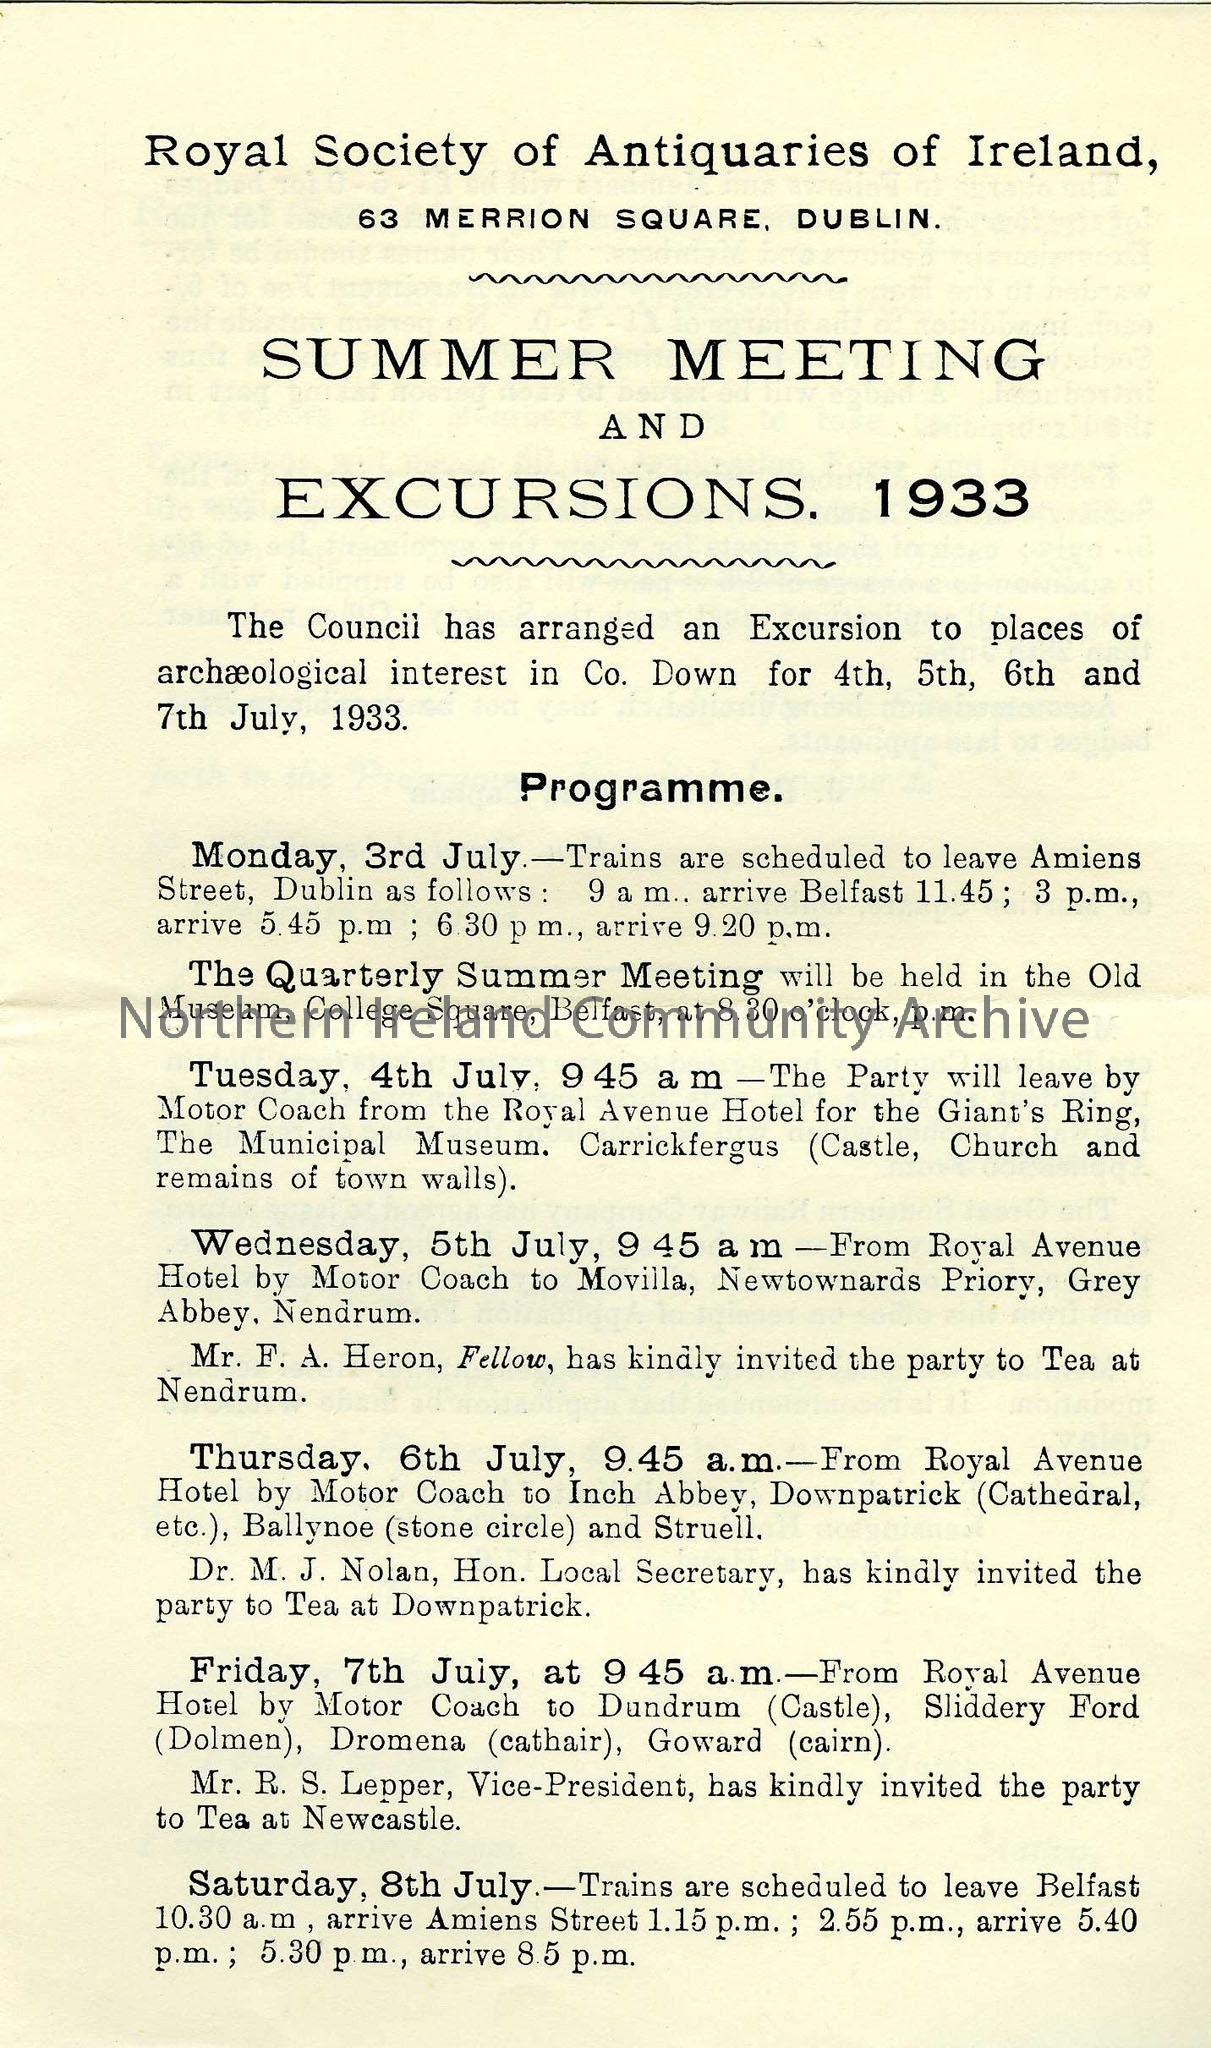 Summer Excursions and Meetings, 1933